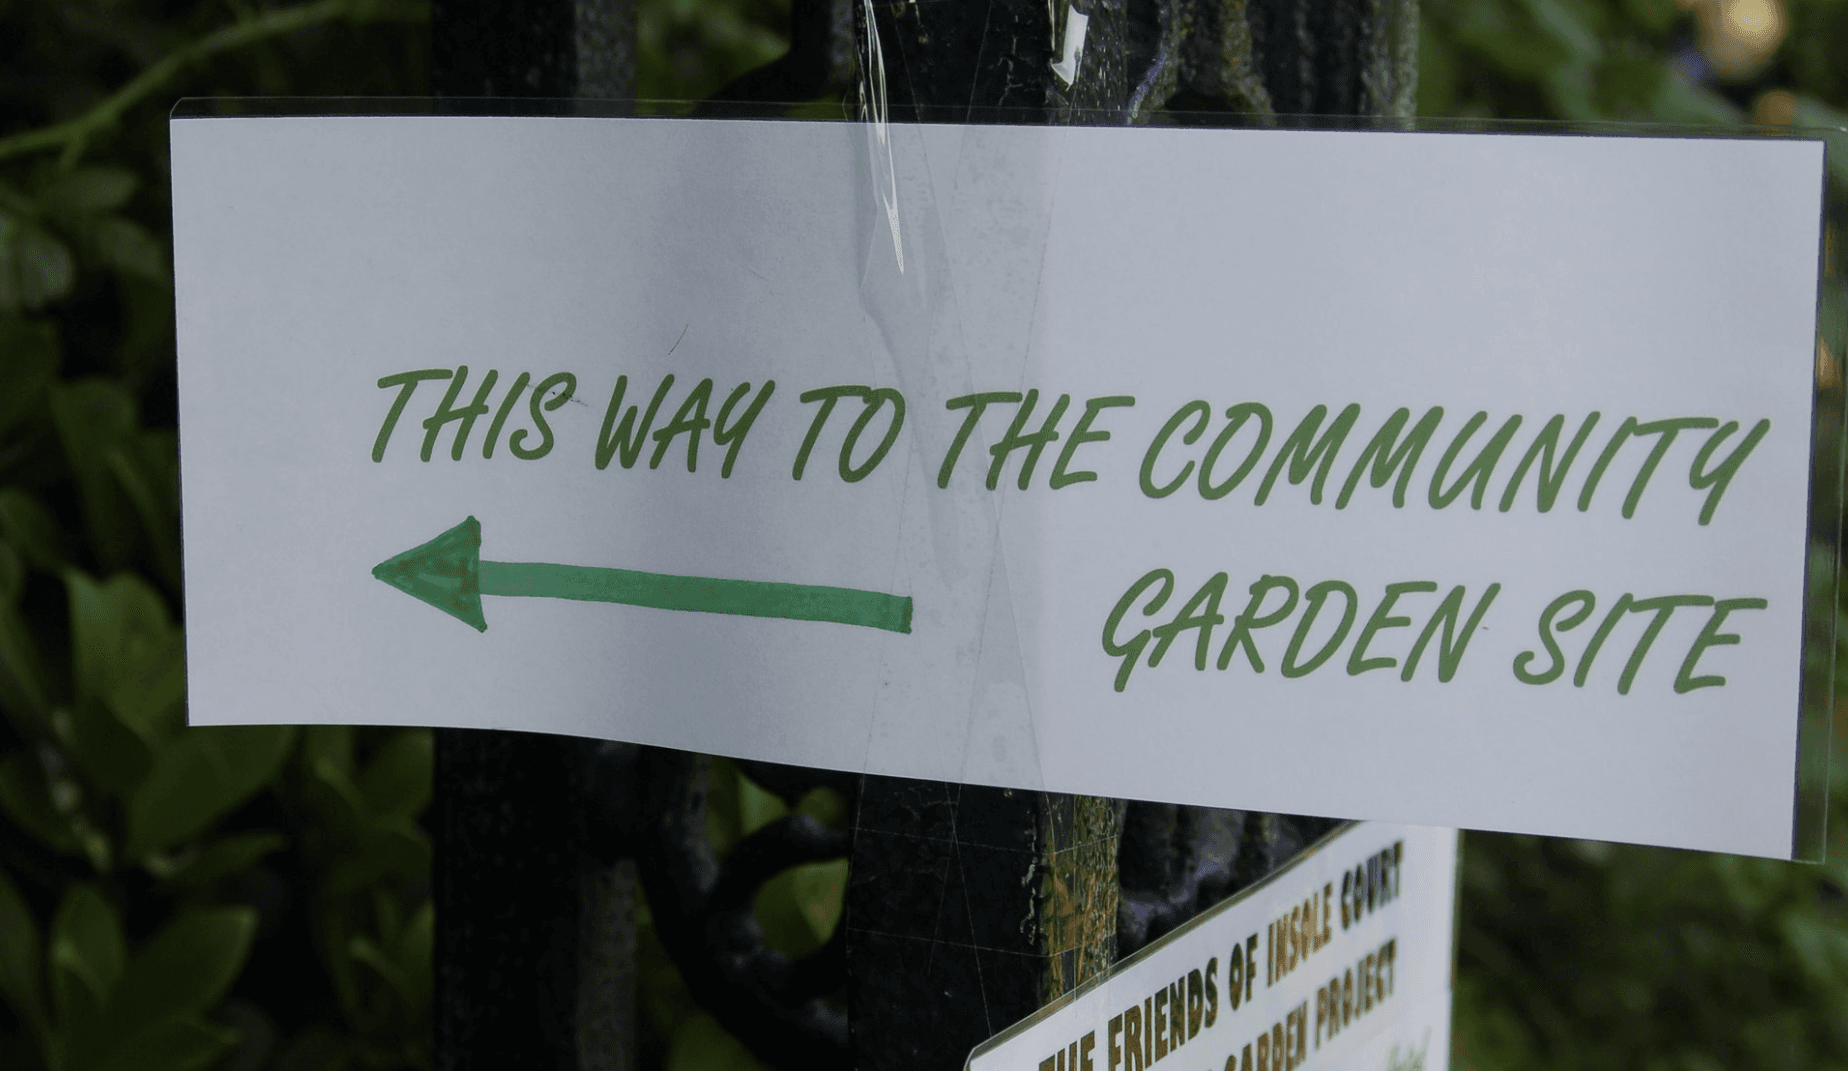 Printed sign with green arrow and text "This way to the community garden site"